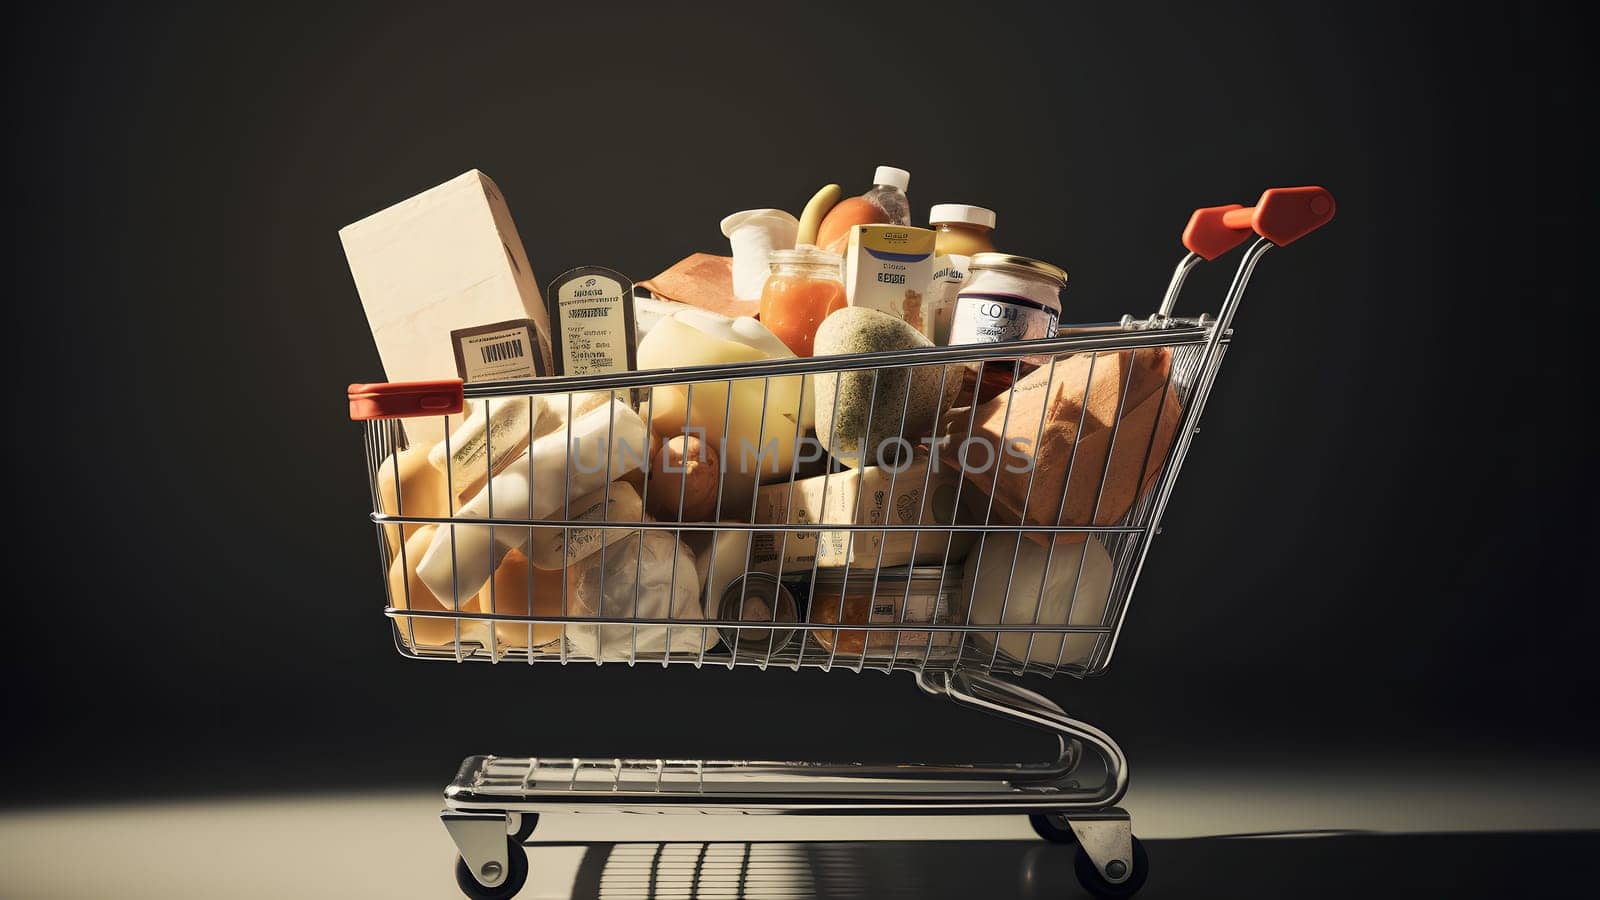 supermarket cart filled with products on black background. Neural network generated in May 2023. Not based on any actual person, scene or pattern.